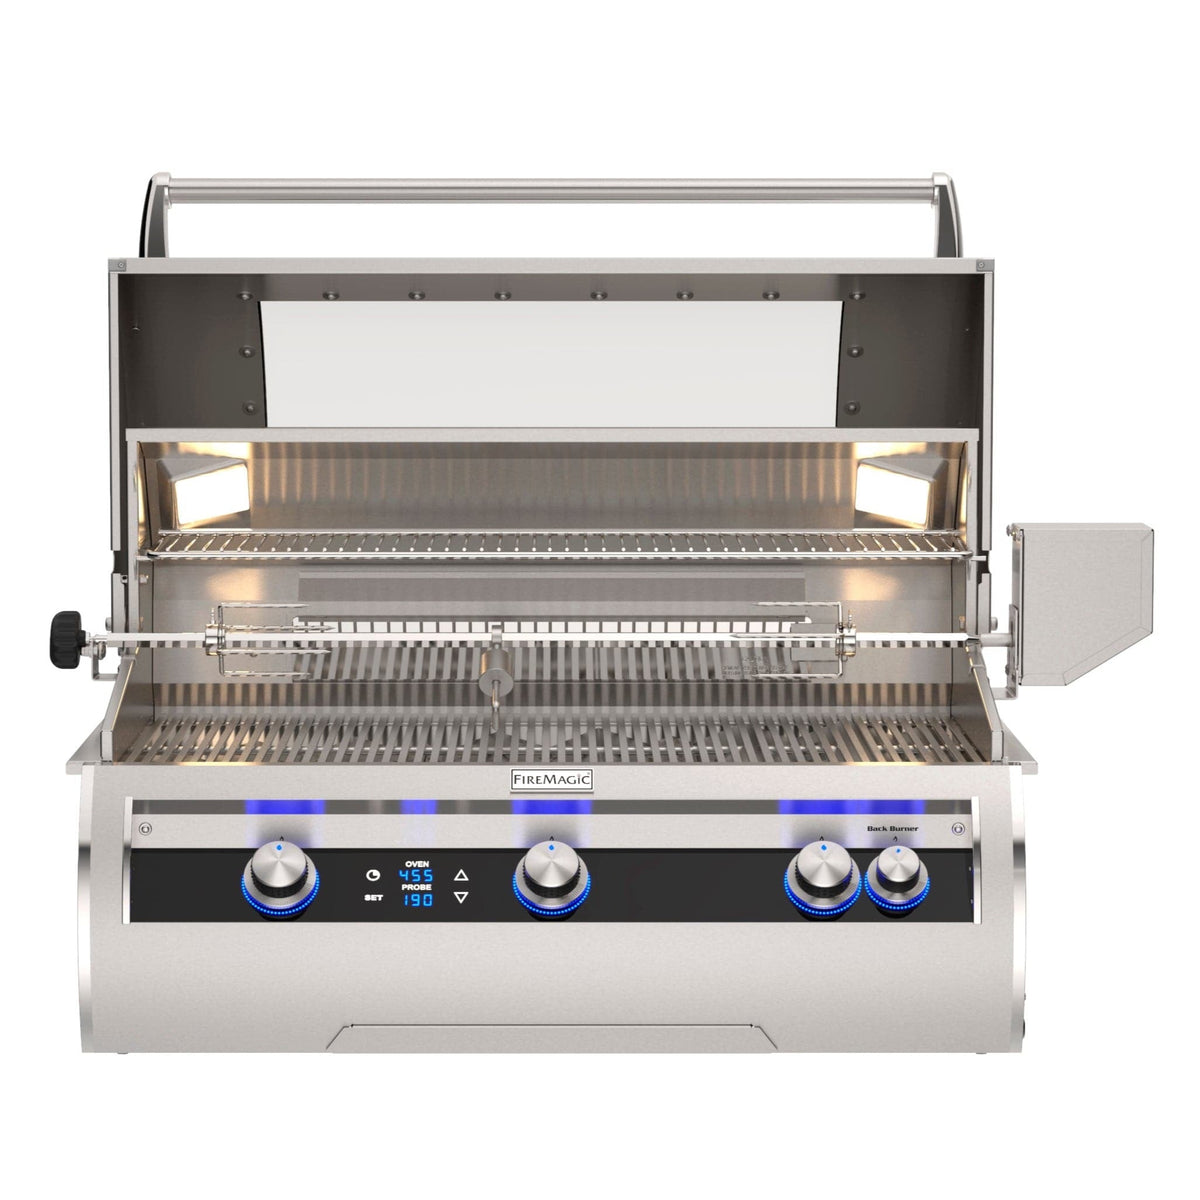 Firemagic Grills Fire Magic Echelon Diamond E790i Built-In Grill with Rotisserie and Digital Thermometer / E790i-9E1N(P), E790i-9L1N(P), E790i-9E1N(P)-W, E790i-9L1N(P)-W